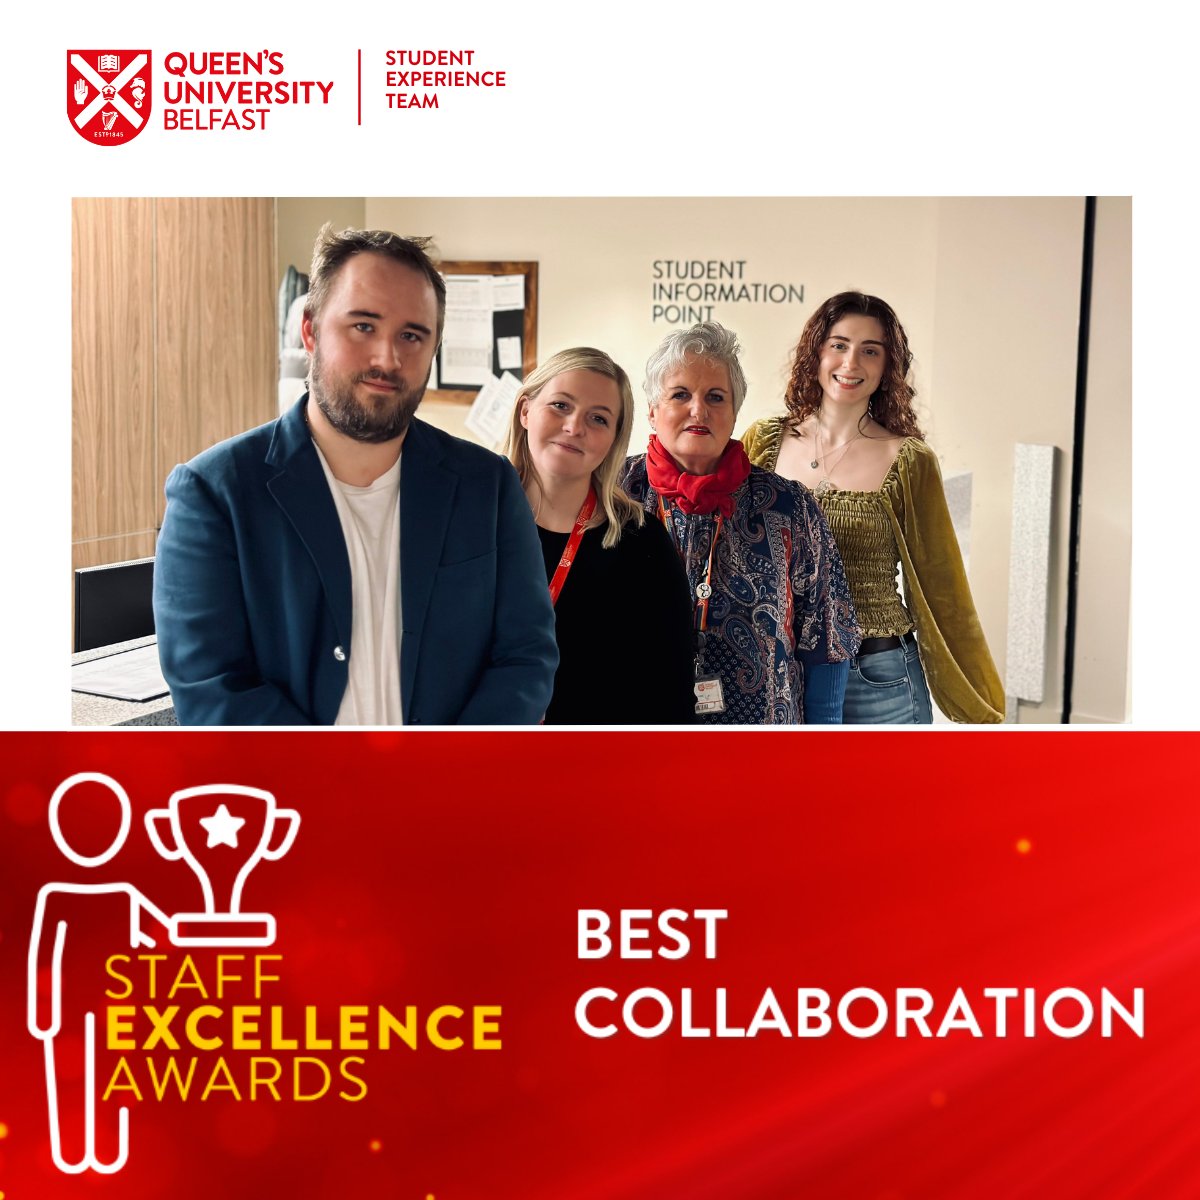 🌟Exciting News! @QUBelfast Student Experience Team is shortlisted for the Staff Excellence Awards 🏆 in the BEST COLLABORATION category! A nod to our dedicated teammates - Conor, Ally, Ann, and Rachel!👏 View the other nominees: ow.ly/UgkS50QAfIP